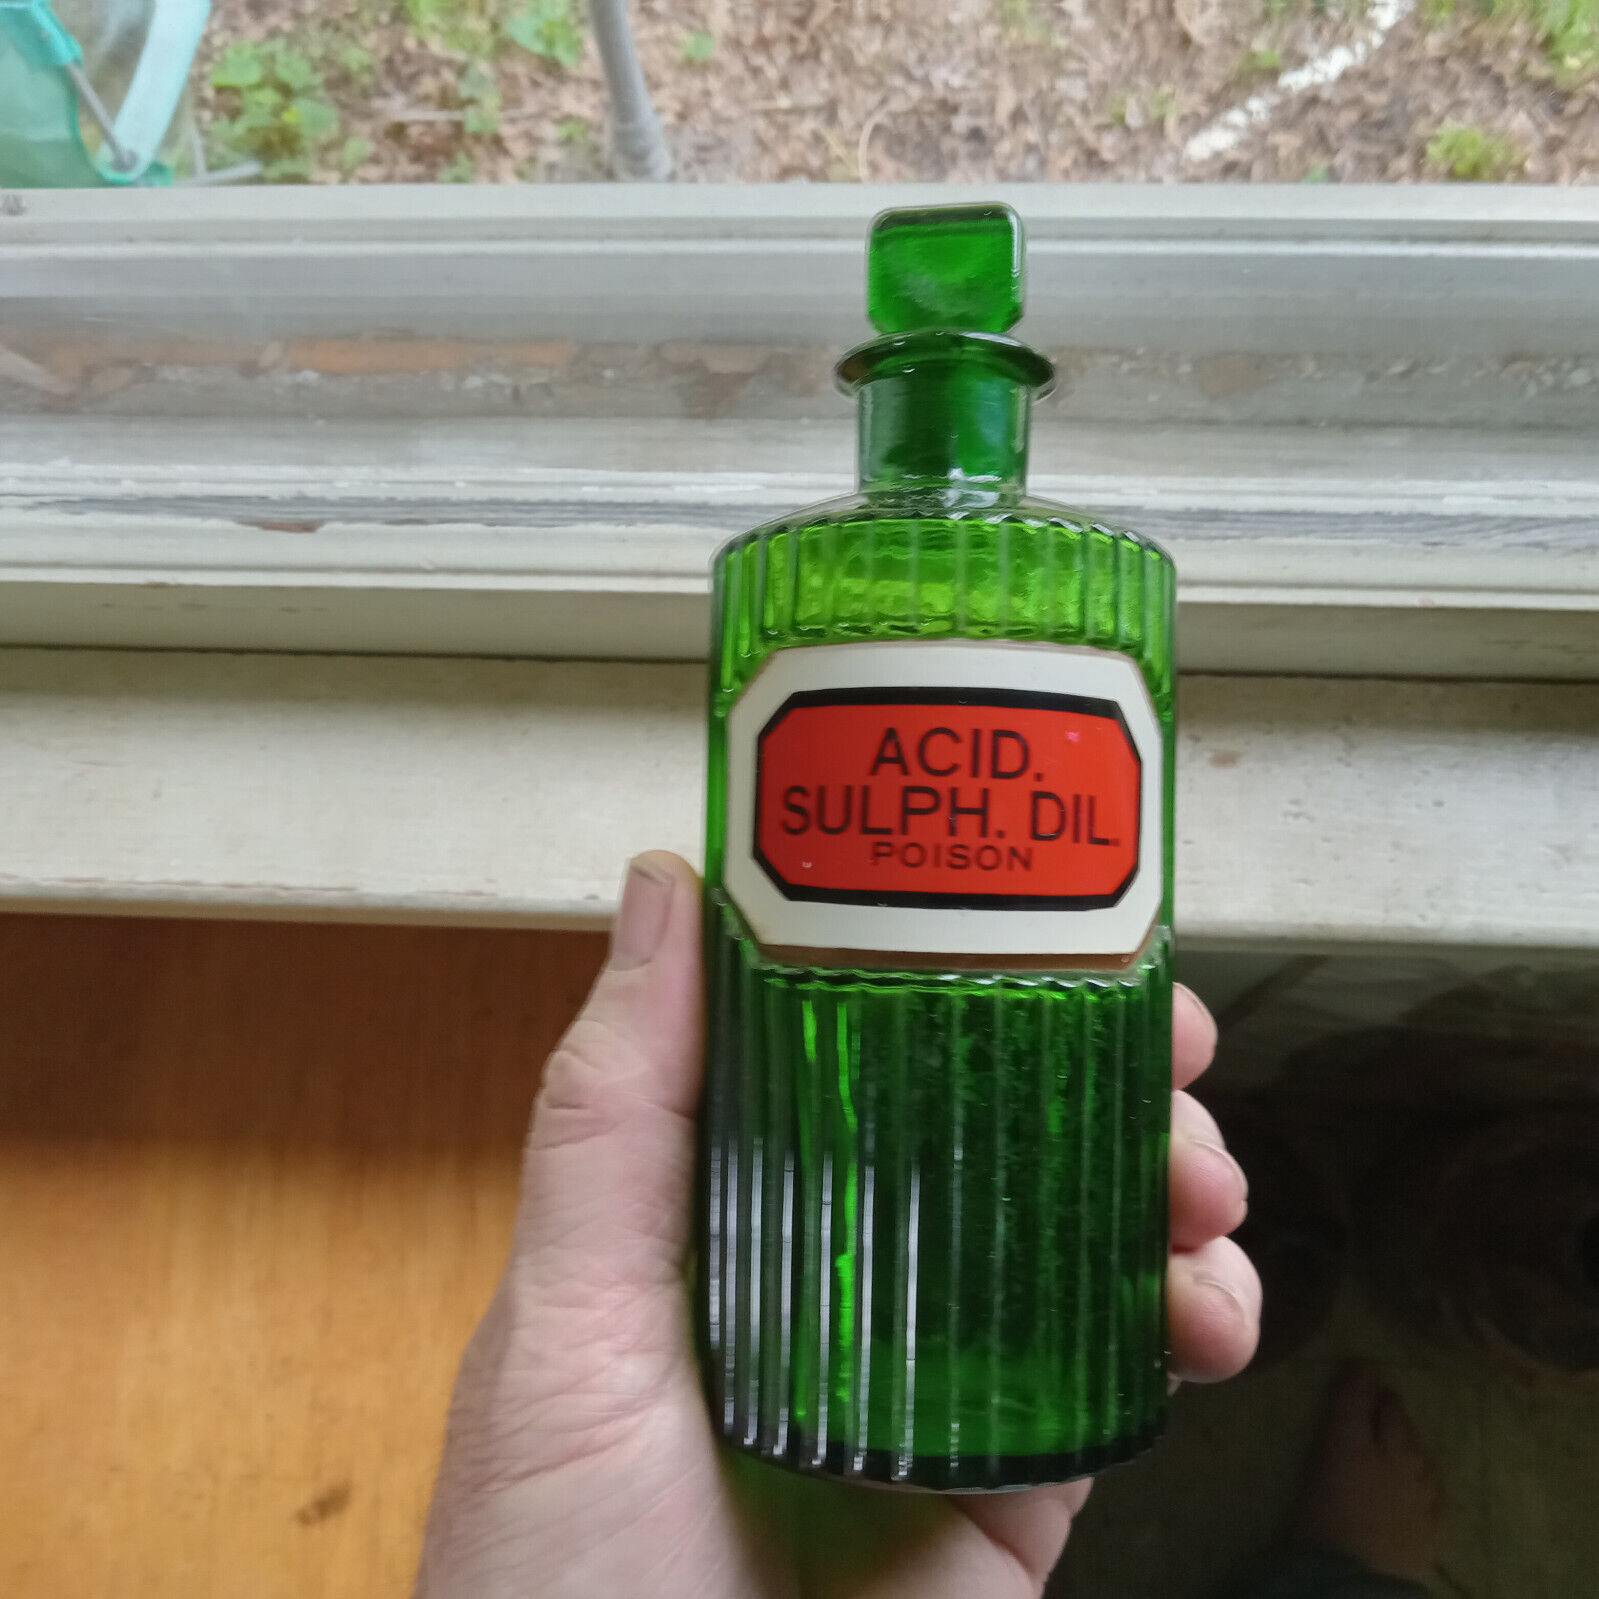 GREEN RIBBED ACID SULPH.POISON LABEL UNDER GLASS APOTHECARY BOTTLE WITH STOPPER